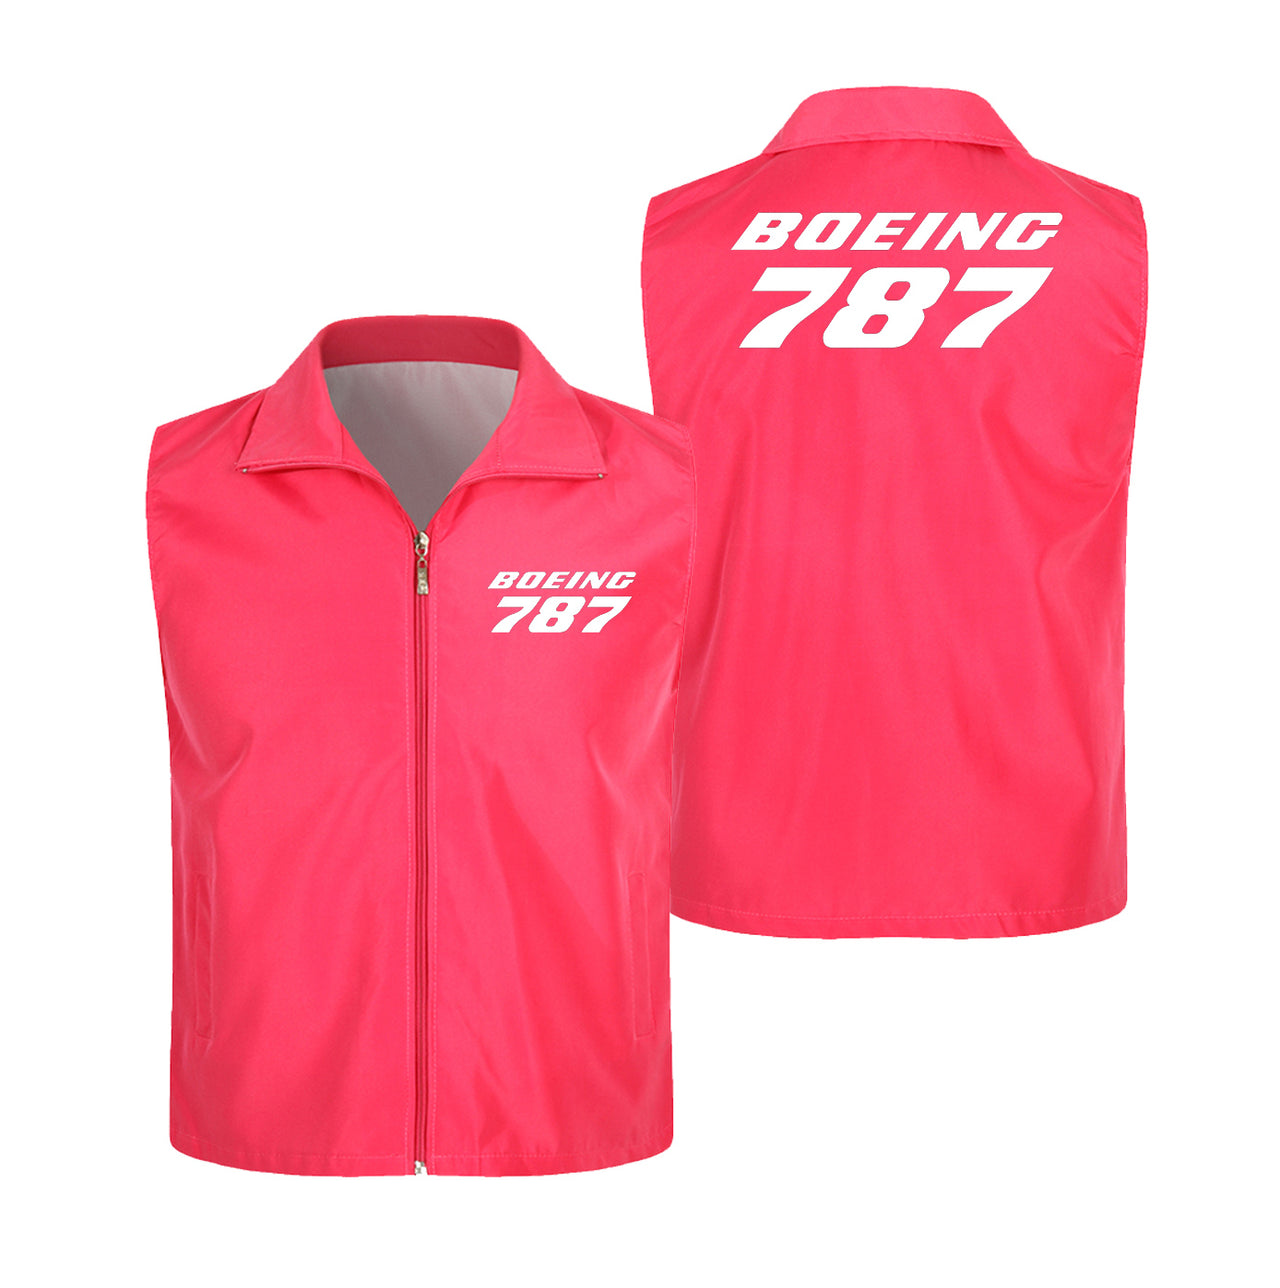 Boeing 787 & Text Designed Thin Style Vests